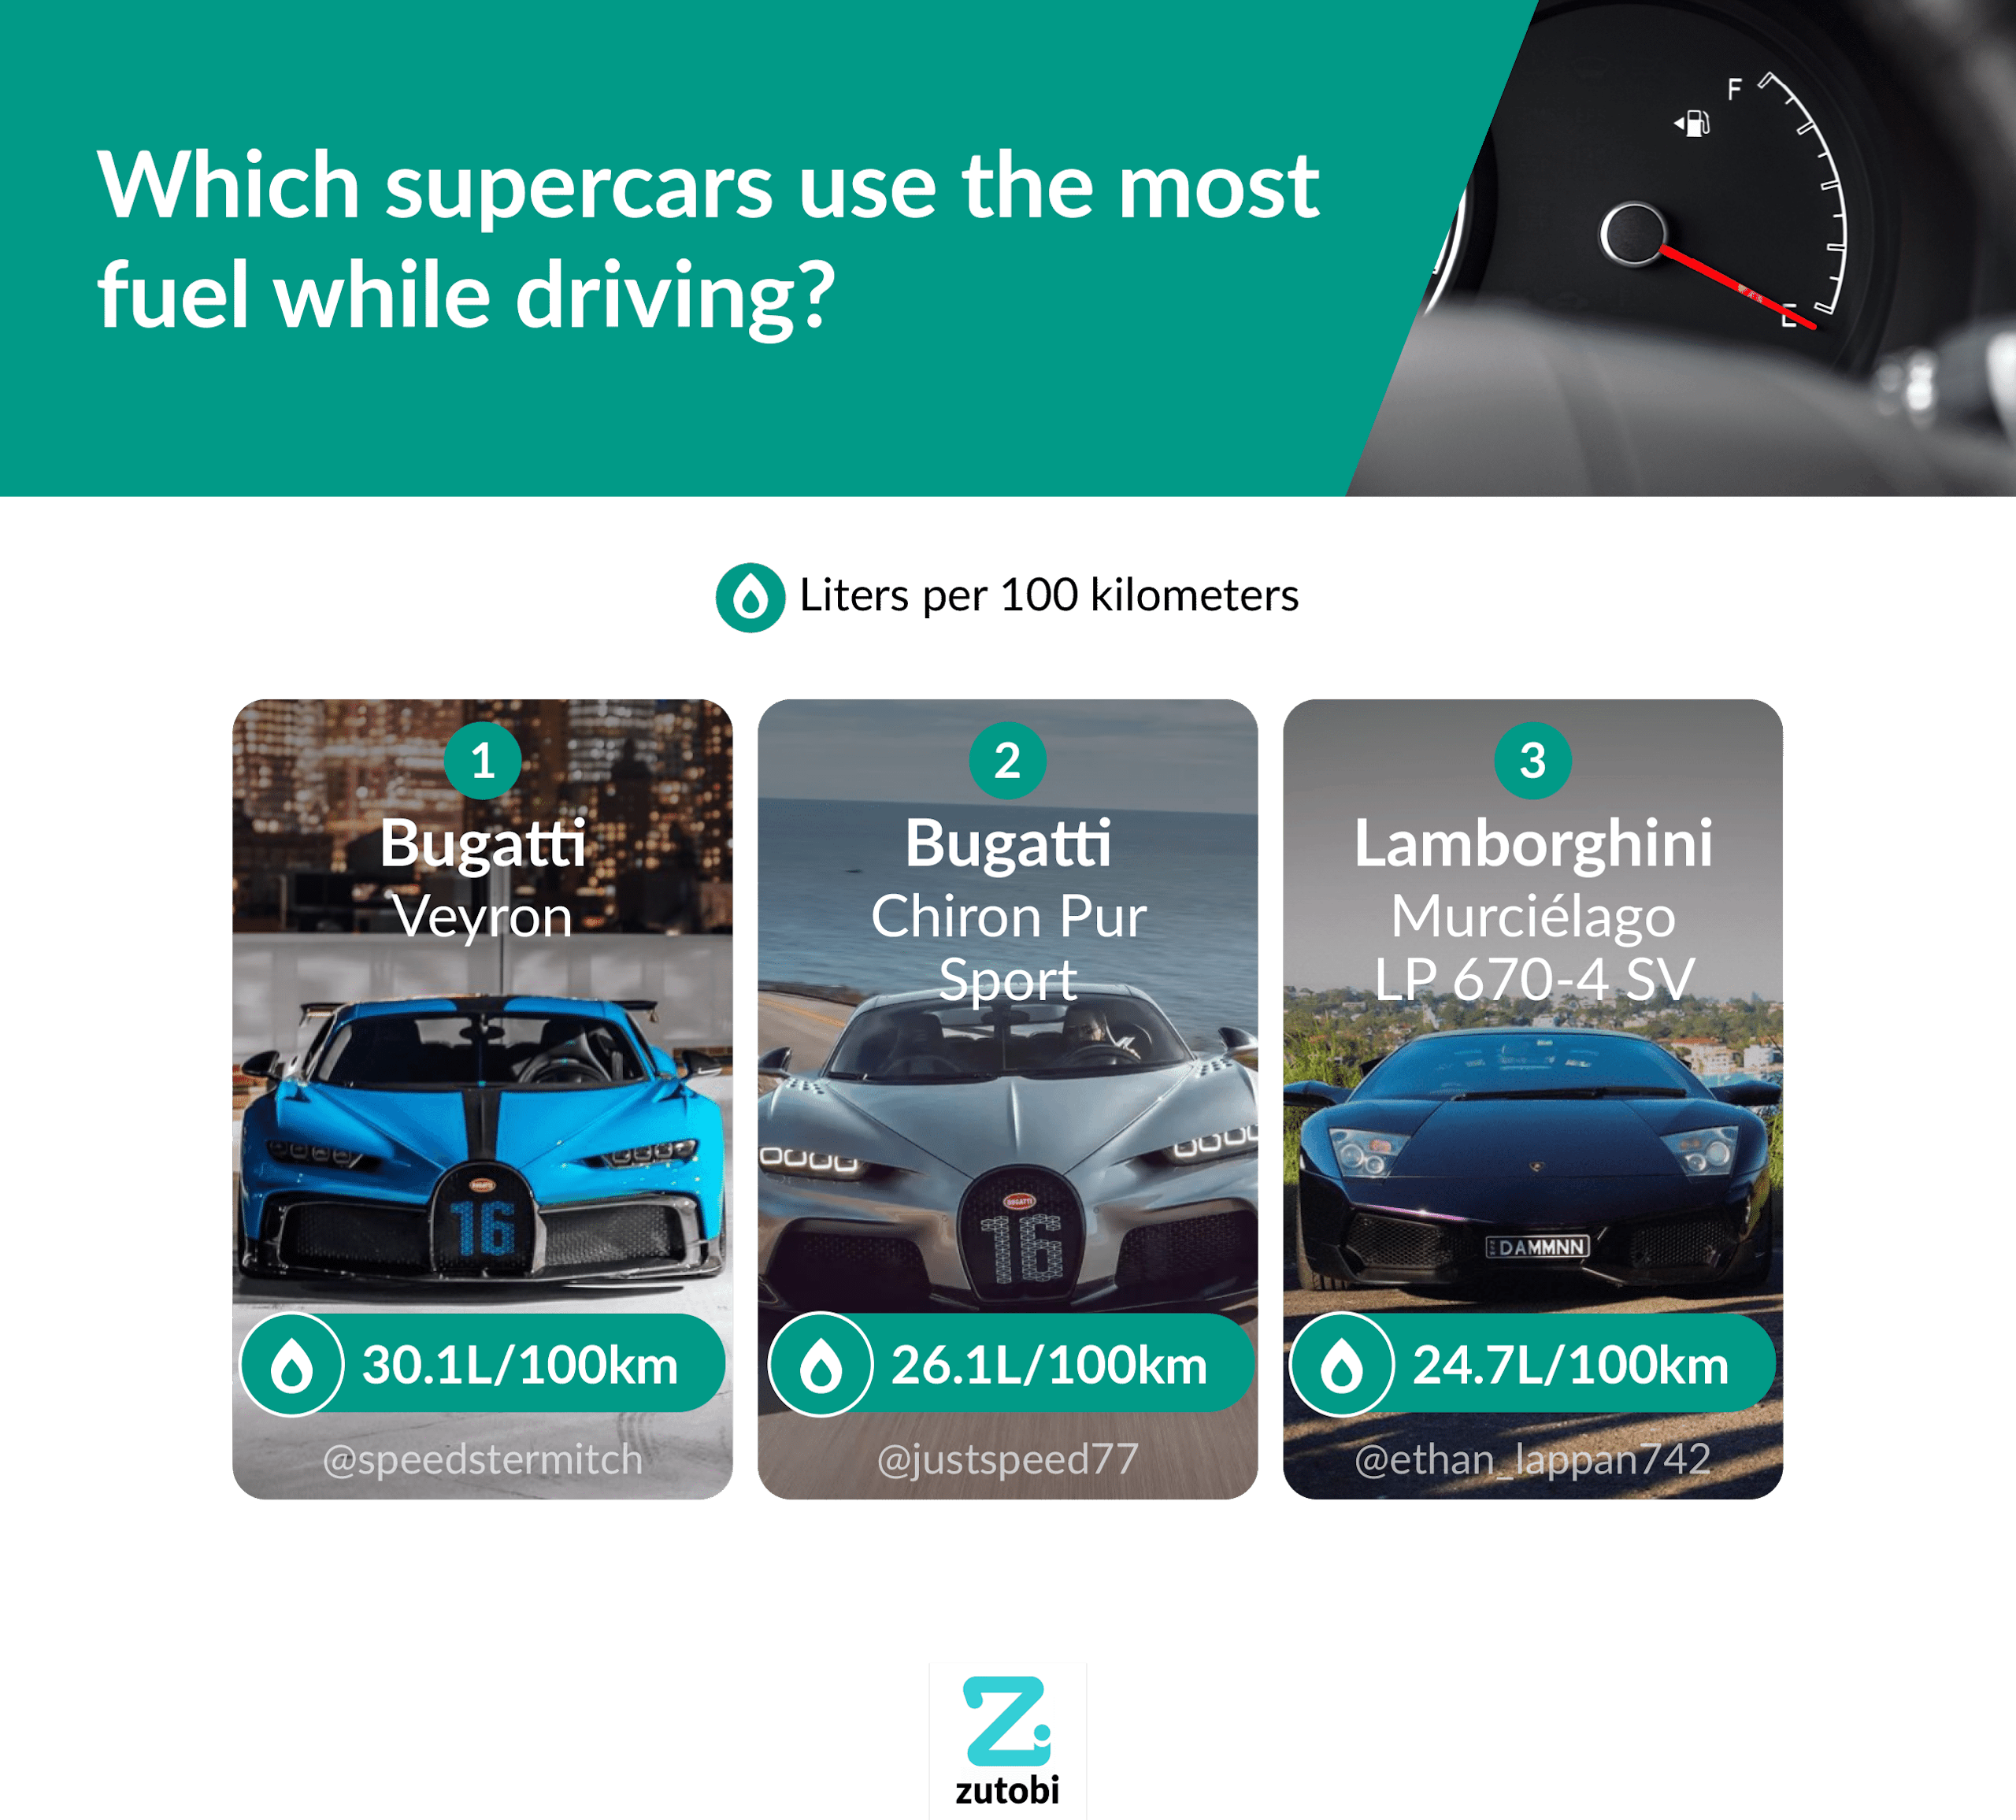 Which supercars use the most fuel while driving?